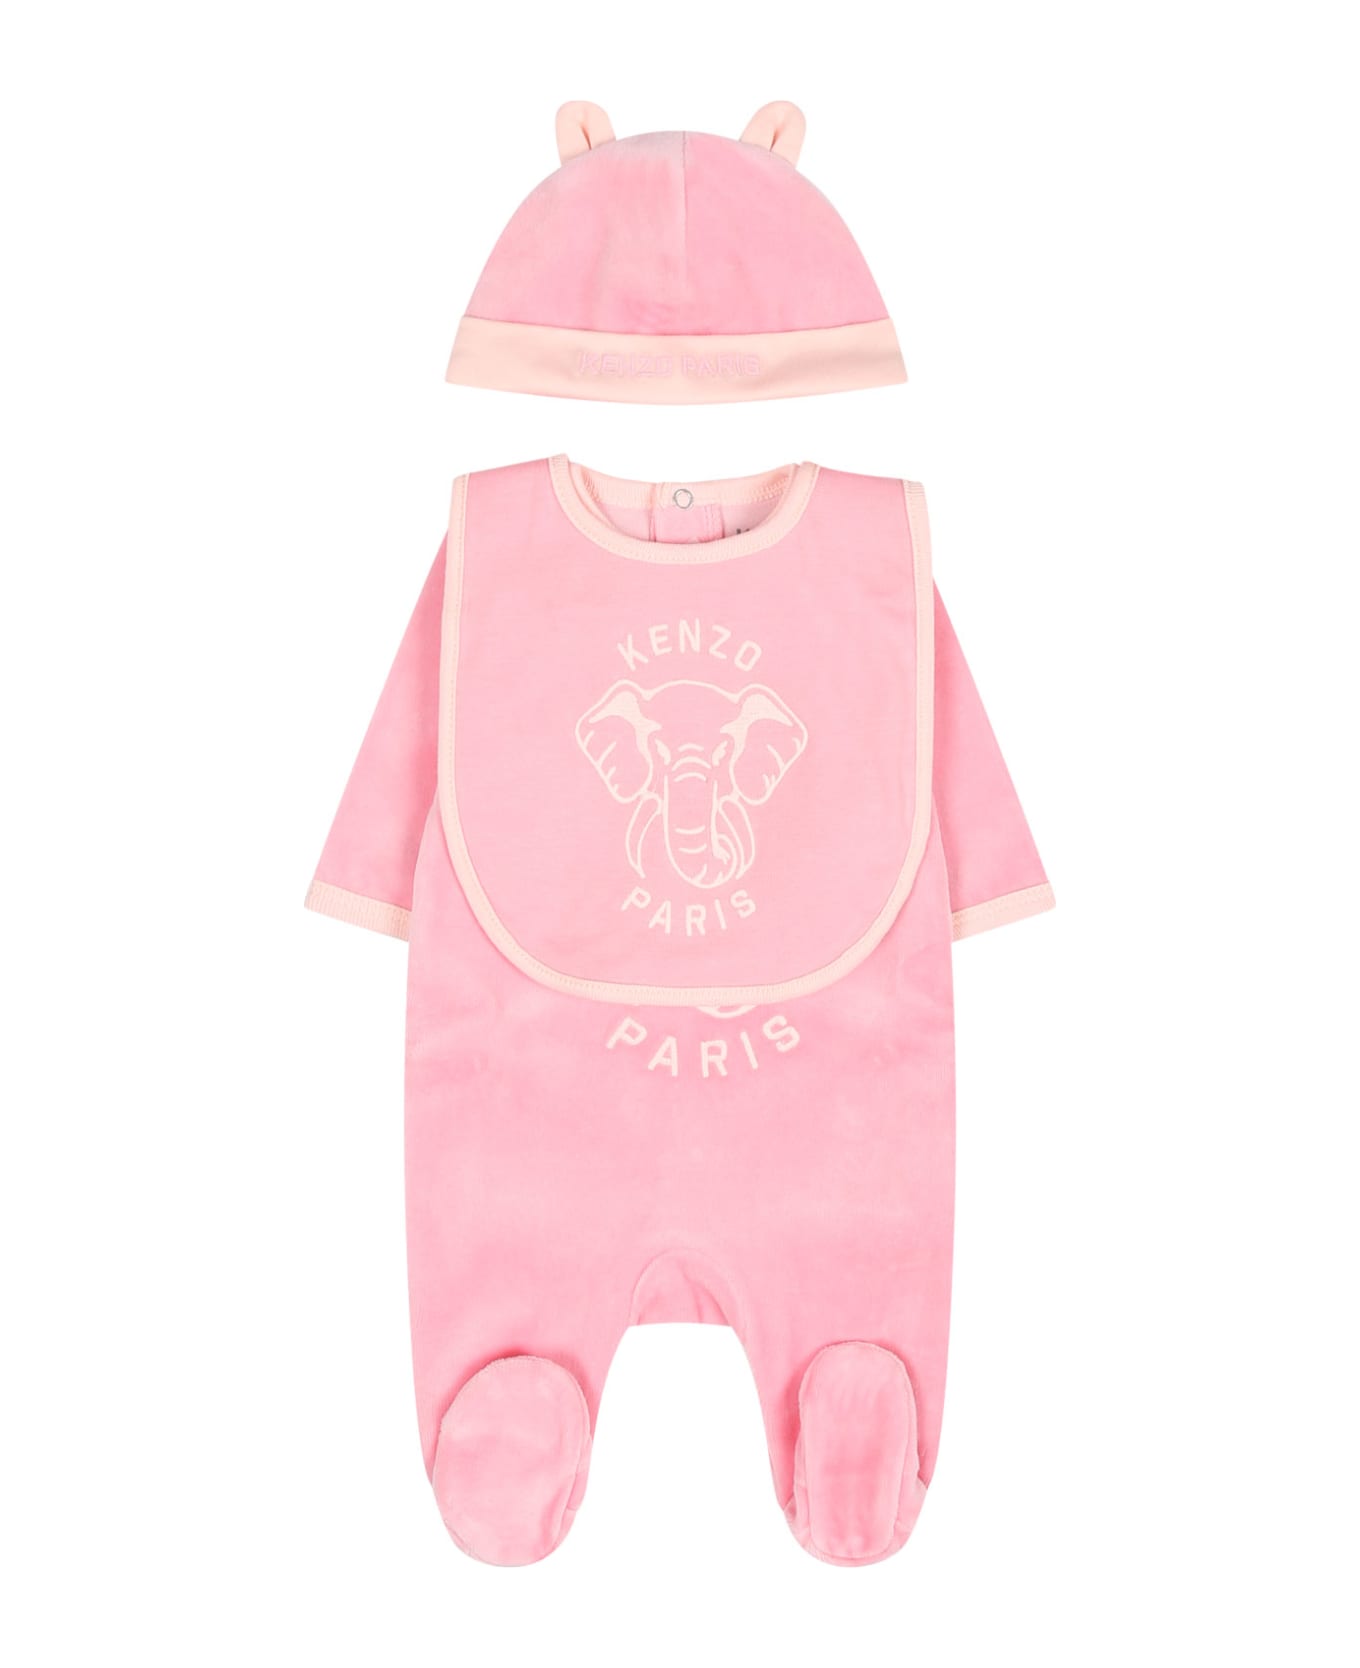 Kenzo Kids Pink Set For Baby Girl With Print And Logo - Pink